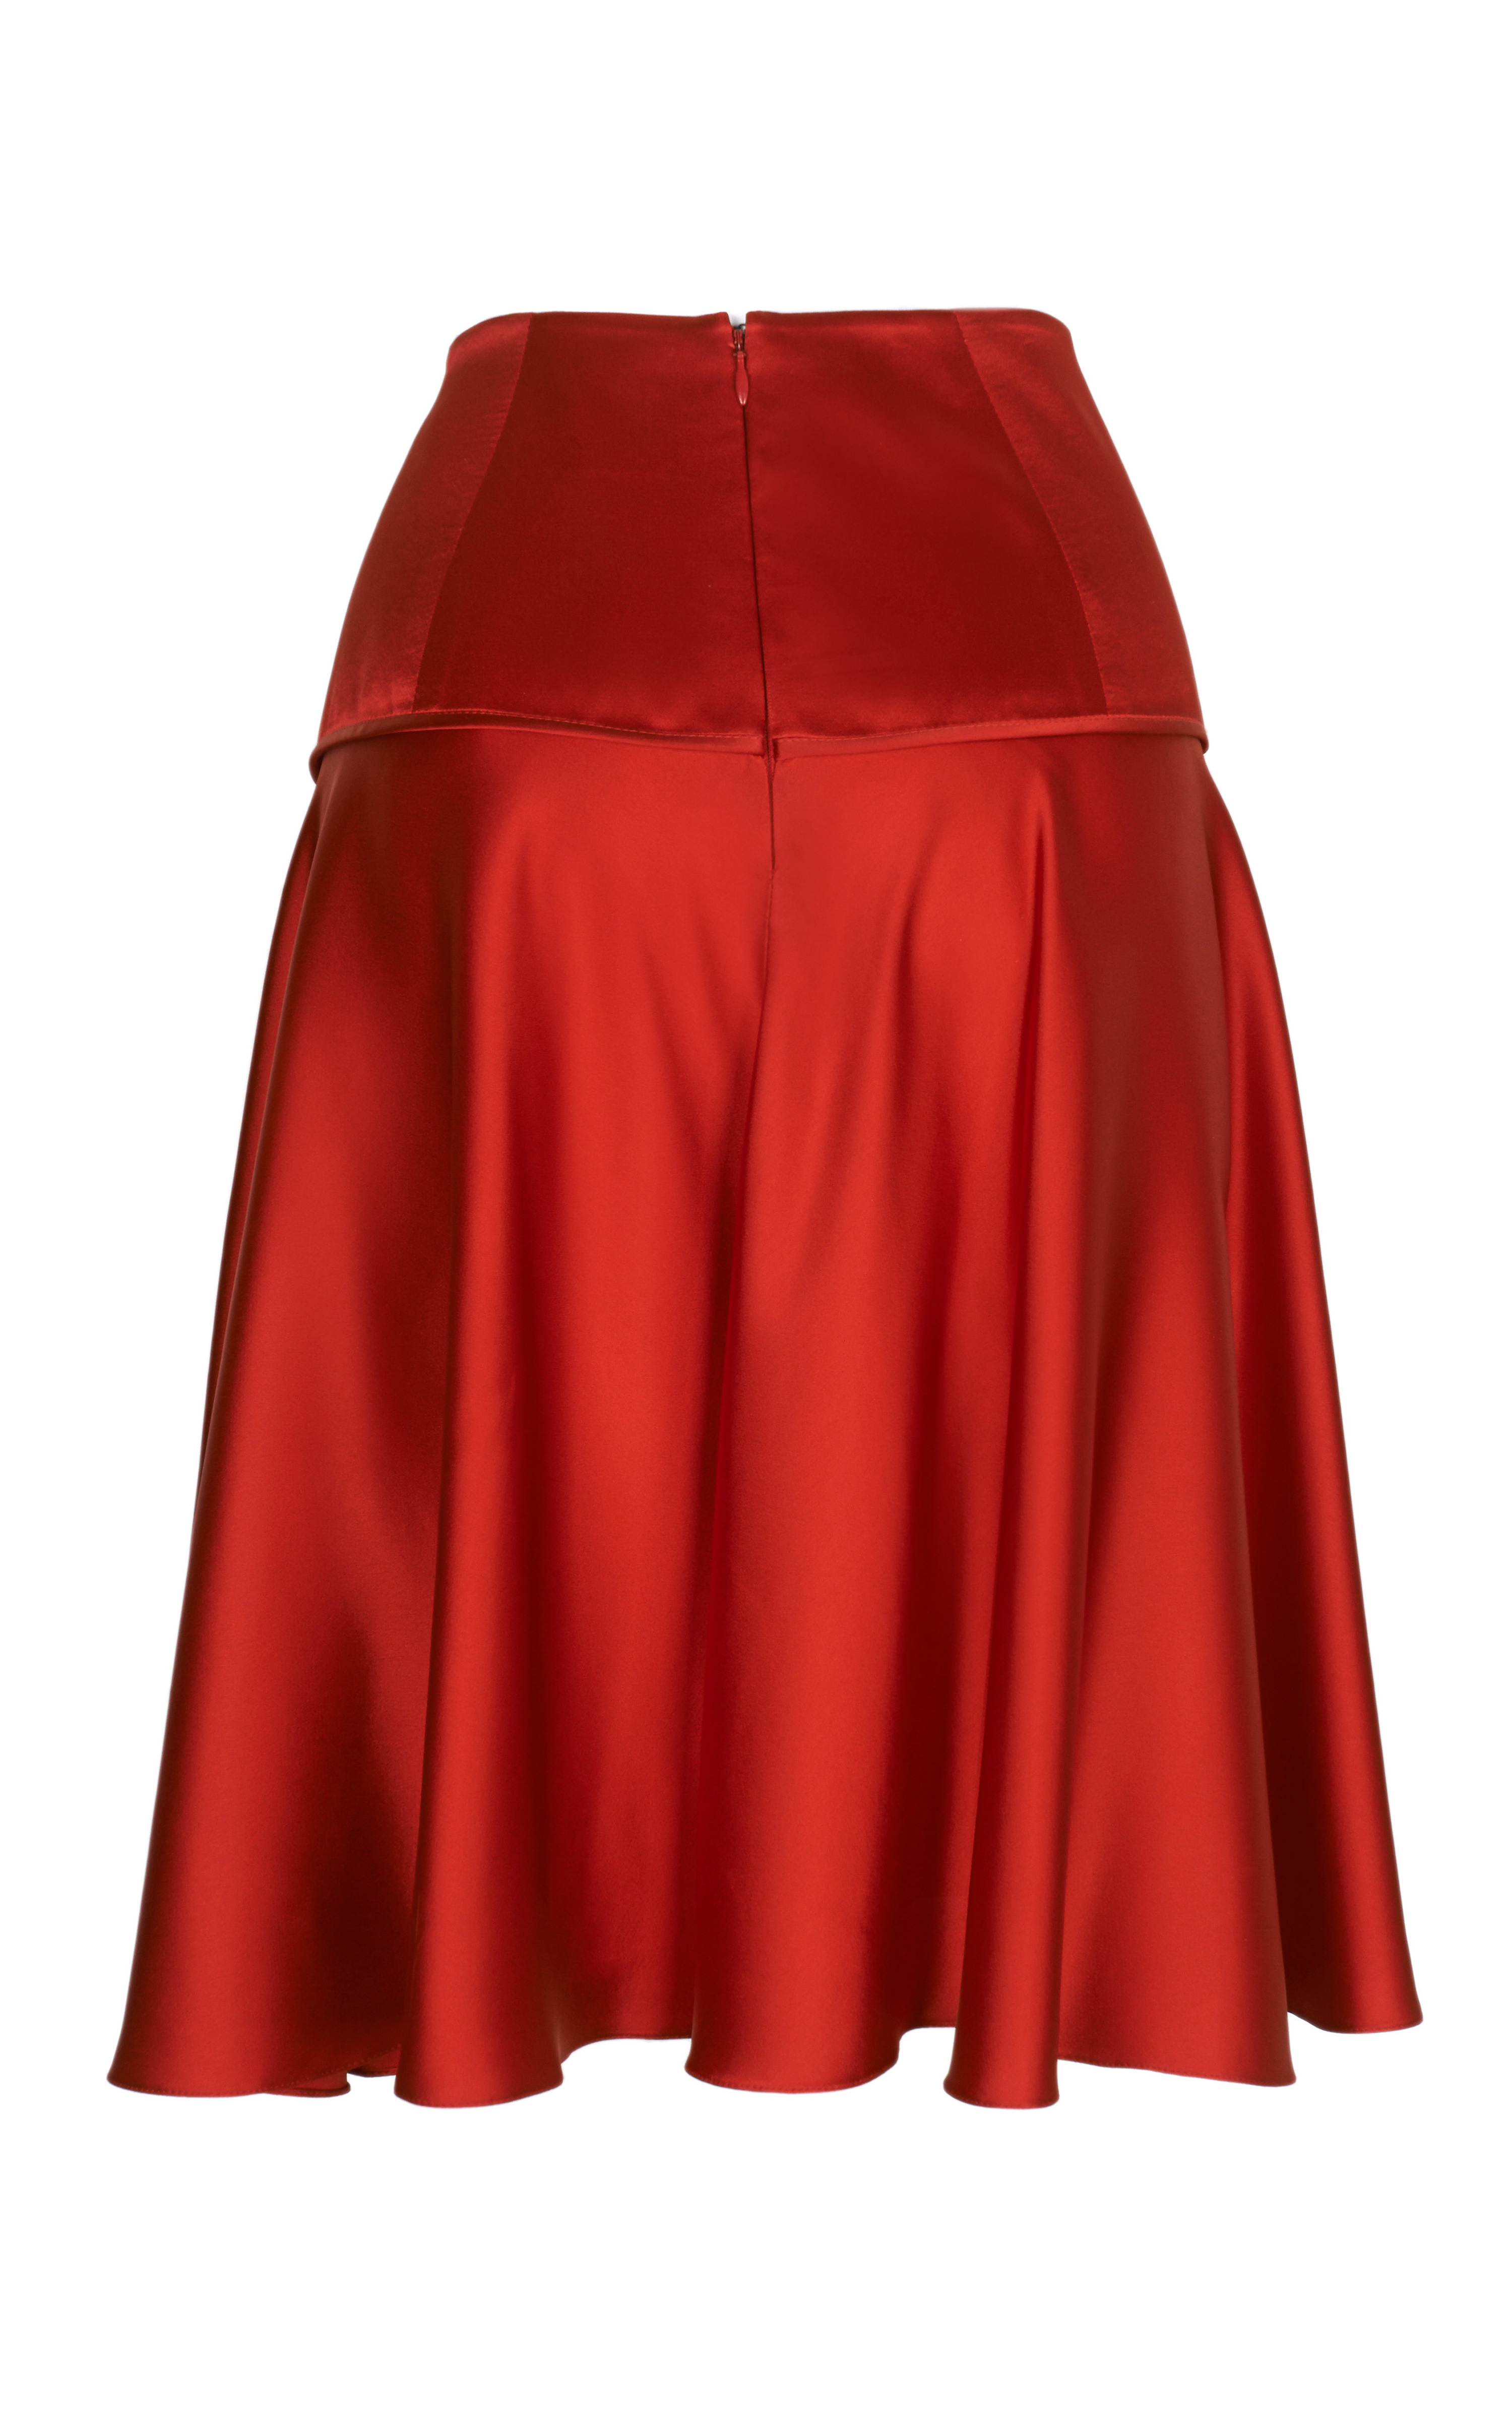 Lyst - Jonathan Saunders Marie Fluid Satin Circle Skirt in Red